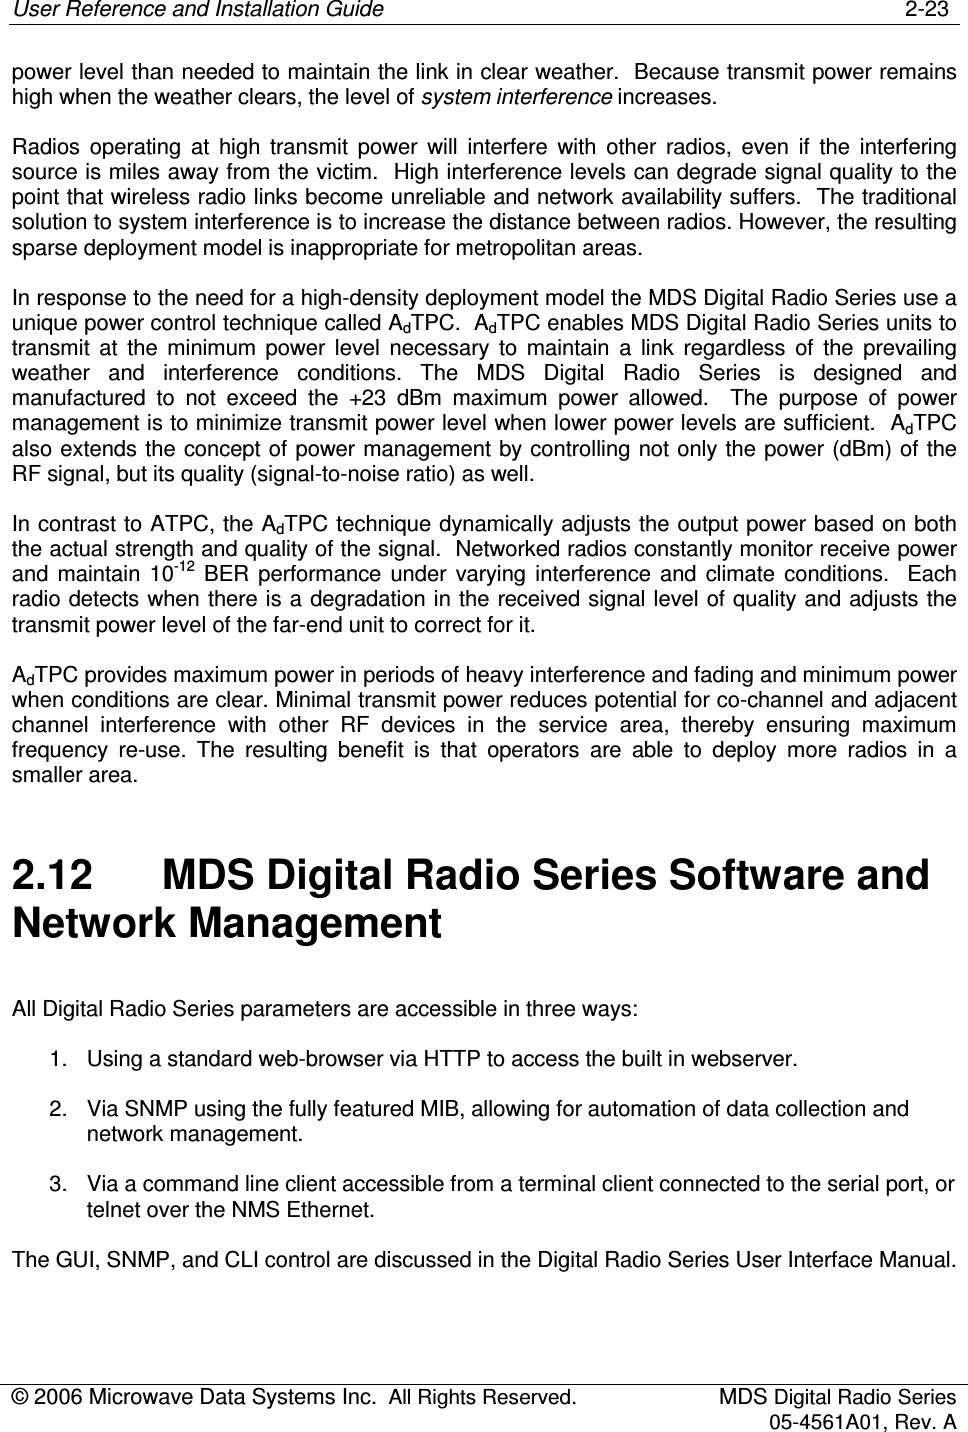 User Reference and Installation Guide    2-23 © 2006 Microwave Data Systems Inc.  All Rights Reserved.  MDS Digital Radio Series 05-4561A01, Rev. A  power level than needed to maintain the link in clear weather.  Because transmit power remains high when the weather clears, the level of system interference increases. Radios  operating  at  high  transmit  power  will  interfere  with  other  radios,  even  if  the  interfering source is miles away from the victim.  High interference levels can degrade signal quality to the point that wireless radio links become unreliable and network availability suffers.  The traditional solution to system interference is to increase the distance between radios. However, the resulting sparse deployment model is inappropriate for metropolitan areas. In response to the need for a high-density deployment model the MDS Digital Radio Series use a unique power control technique called AdTPC.  AdTPC enables MDS Digital Radio Series units to transmit  at  the  minimum  power  level  necessary  to  maintain  a  link  regardless  of  the  prevailing weather  and  interference  conditions.  The  MDS  Digital  Radio  Series  is  designed  and manufactured  to  not  exceed  the  +23  dBm  maximum  power  allowed.    The  purpose  of  power management is to minimize transmit power level when lower power levels are sufficient.  AdTPC also extends the concept of power management by controlling not only the power (dBm) of the RF signal, but its quality (signal-to-noise ratio) as well. In contrast to ATPC, the AdTPC technique dynamically adjusts the output power based on both the actual strength and quality of the signal.  Networked radios constantly monitor receive power and  maintain  10-12  BER  performance  under  varying  interference  and  climate  conditions.   Each radio detects when there is a degradation in the received signal level of quality and adjusts the transmit power level of the far-end unit to correct for it. AdTPC provides maximum power in periods of heavy interference and fading and minimum power when conditions are clear. Minimal transmit power reduces potential for co-channel and adjacent channel  interference  with  other  RF  devices  in  the  service  area,  thereby  ensuring  maximum frequency  re-use.  The  resulting  benefit  is  that  operators  are  able  to  deploy  more  radios  in  a smaller area. 2.12  MDS Digital Radio Series Software and Network Management All Digital Radio Series parameters are accessible in three ways: 1.  Using a standard web-browser via HTTP to access the built in webserver. 2.  Via SNMP using the fully featured MIB, allowing for automation of data collection and network management. 3.  Via a command line client accessible from a terminal client connected to the serial port, or telnet over the NMS Ethernet. The GUI, SNMP, and CLI control are discussed in the Digital Radio Series User Interface Manual. 